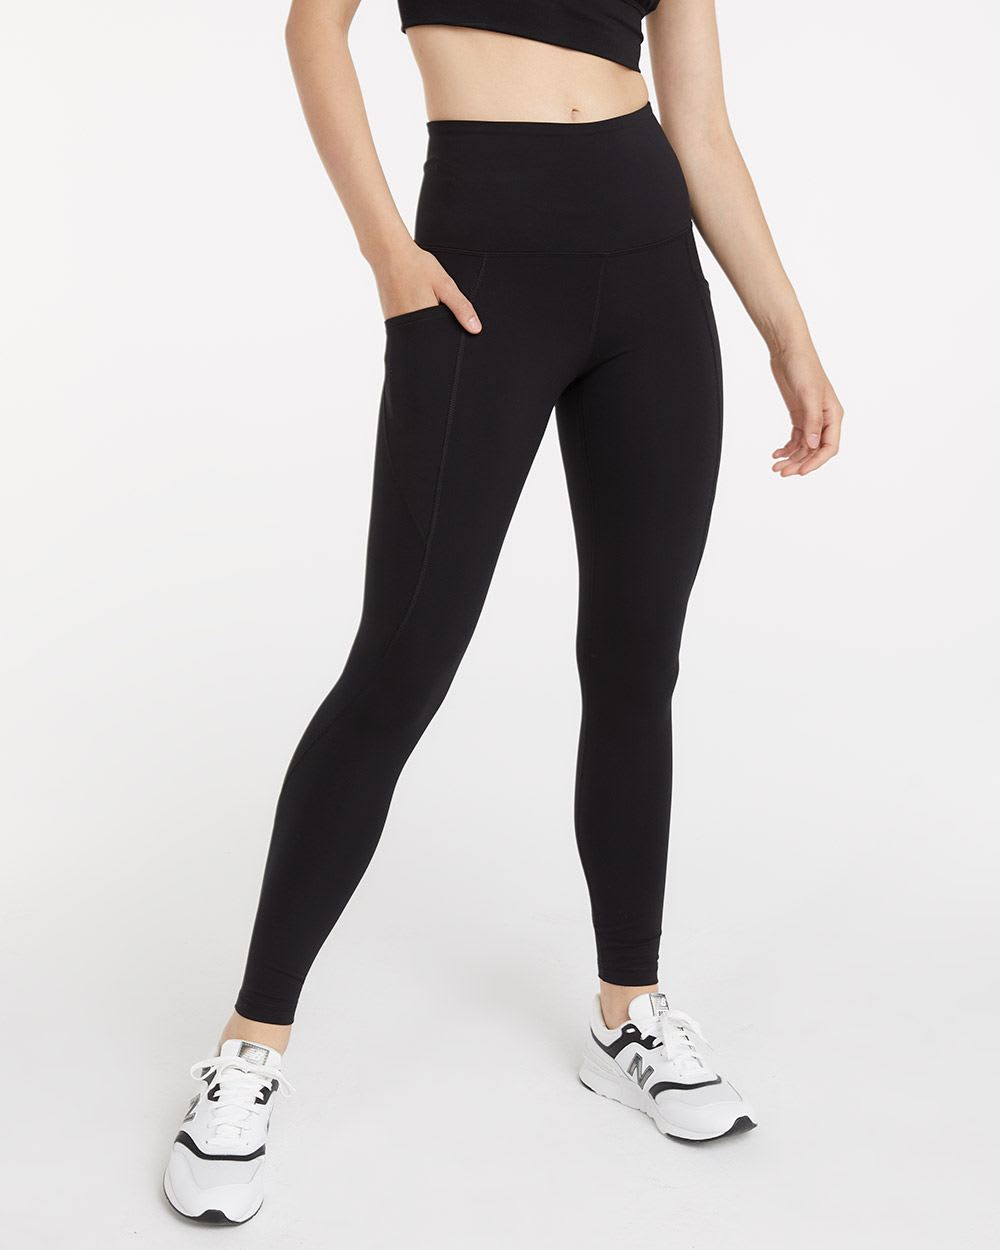 High-Rise Pulse Legging with Pockets - Hyba - Petite